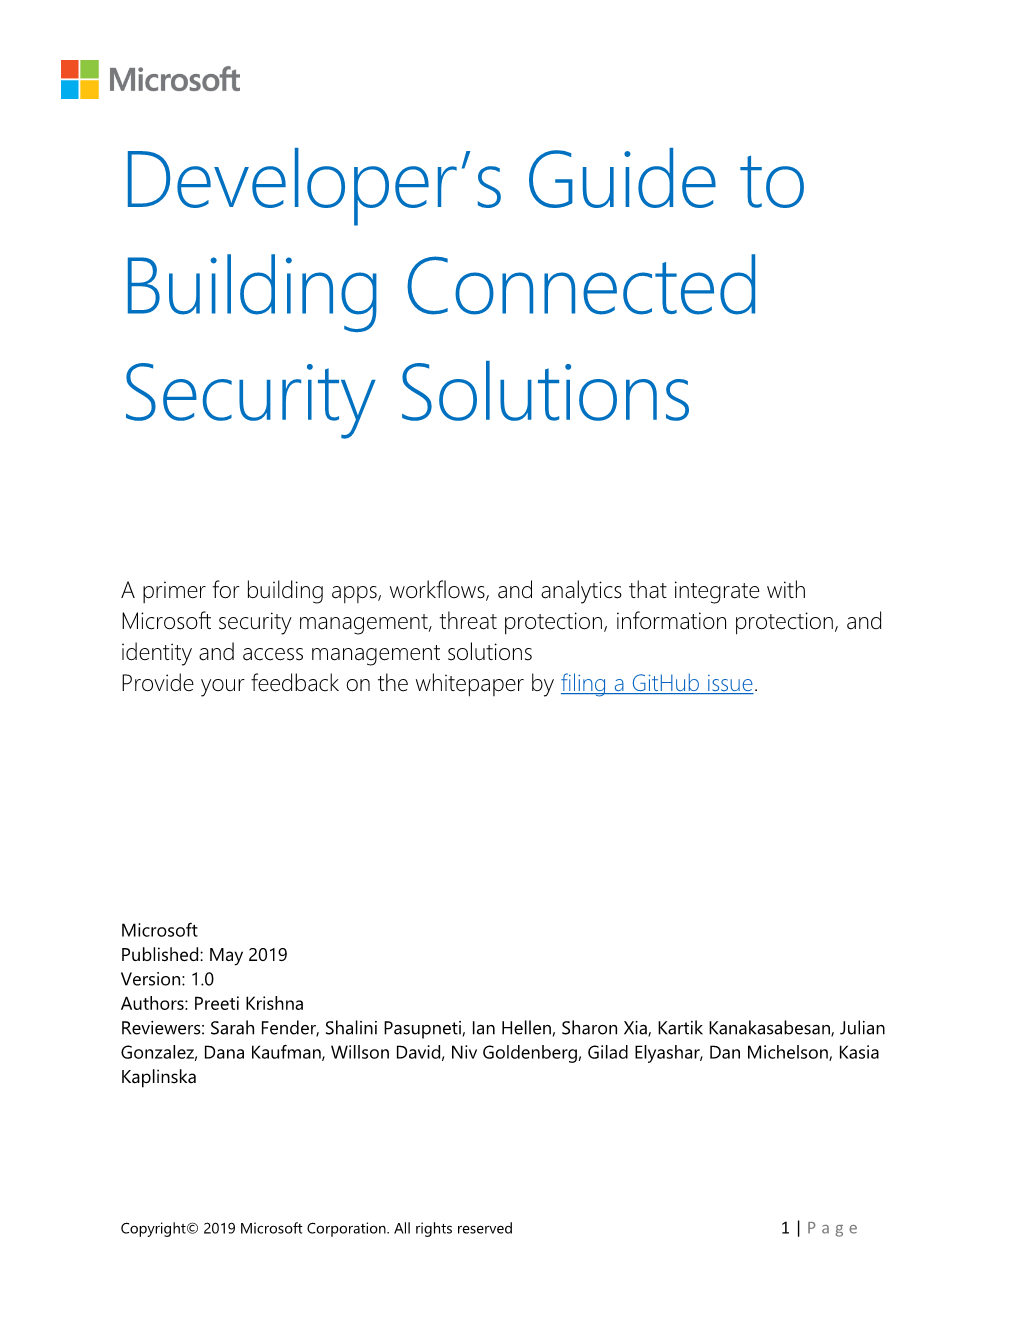 Developer's Guide to Building Connected Security Solutions